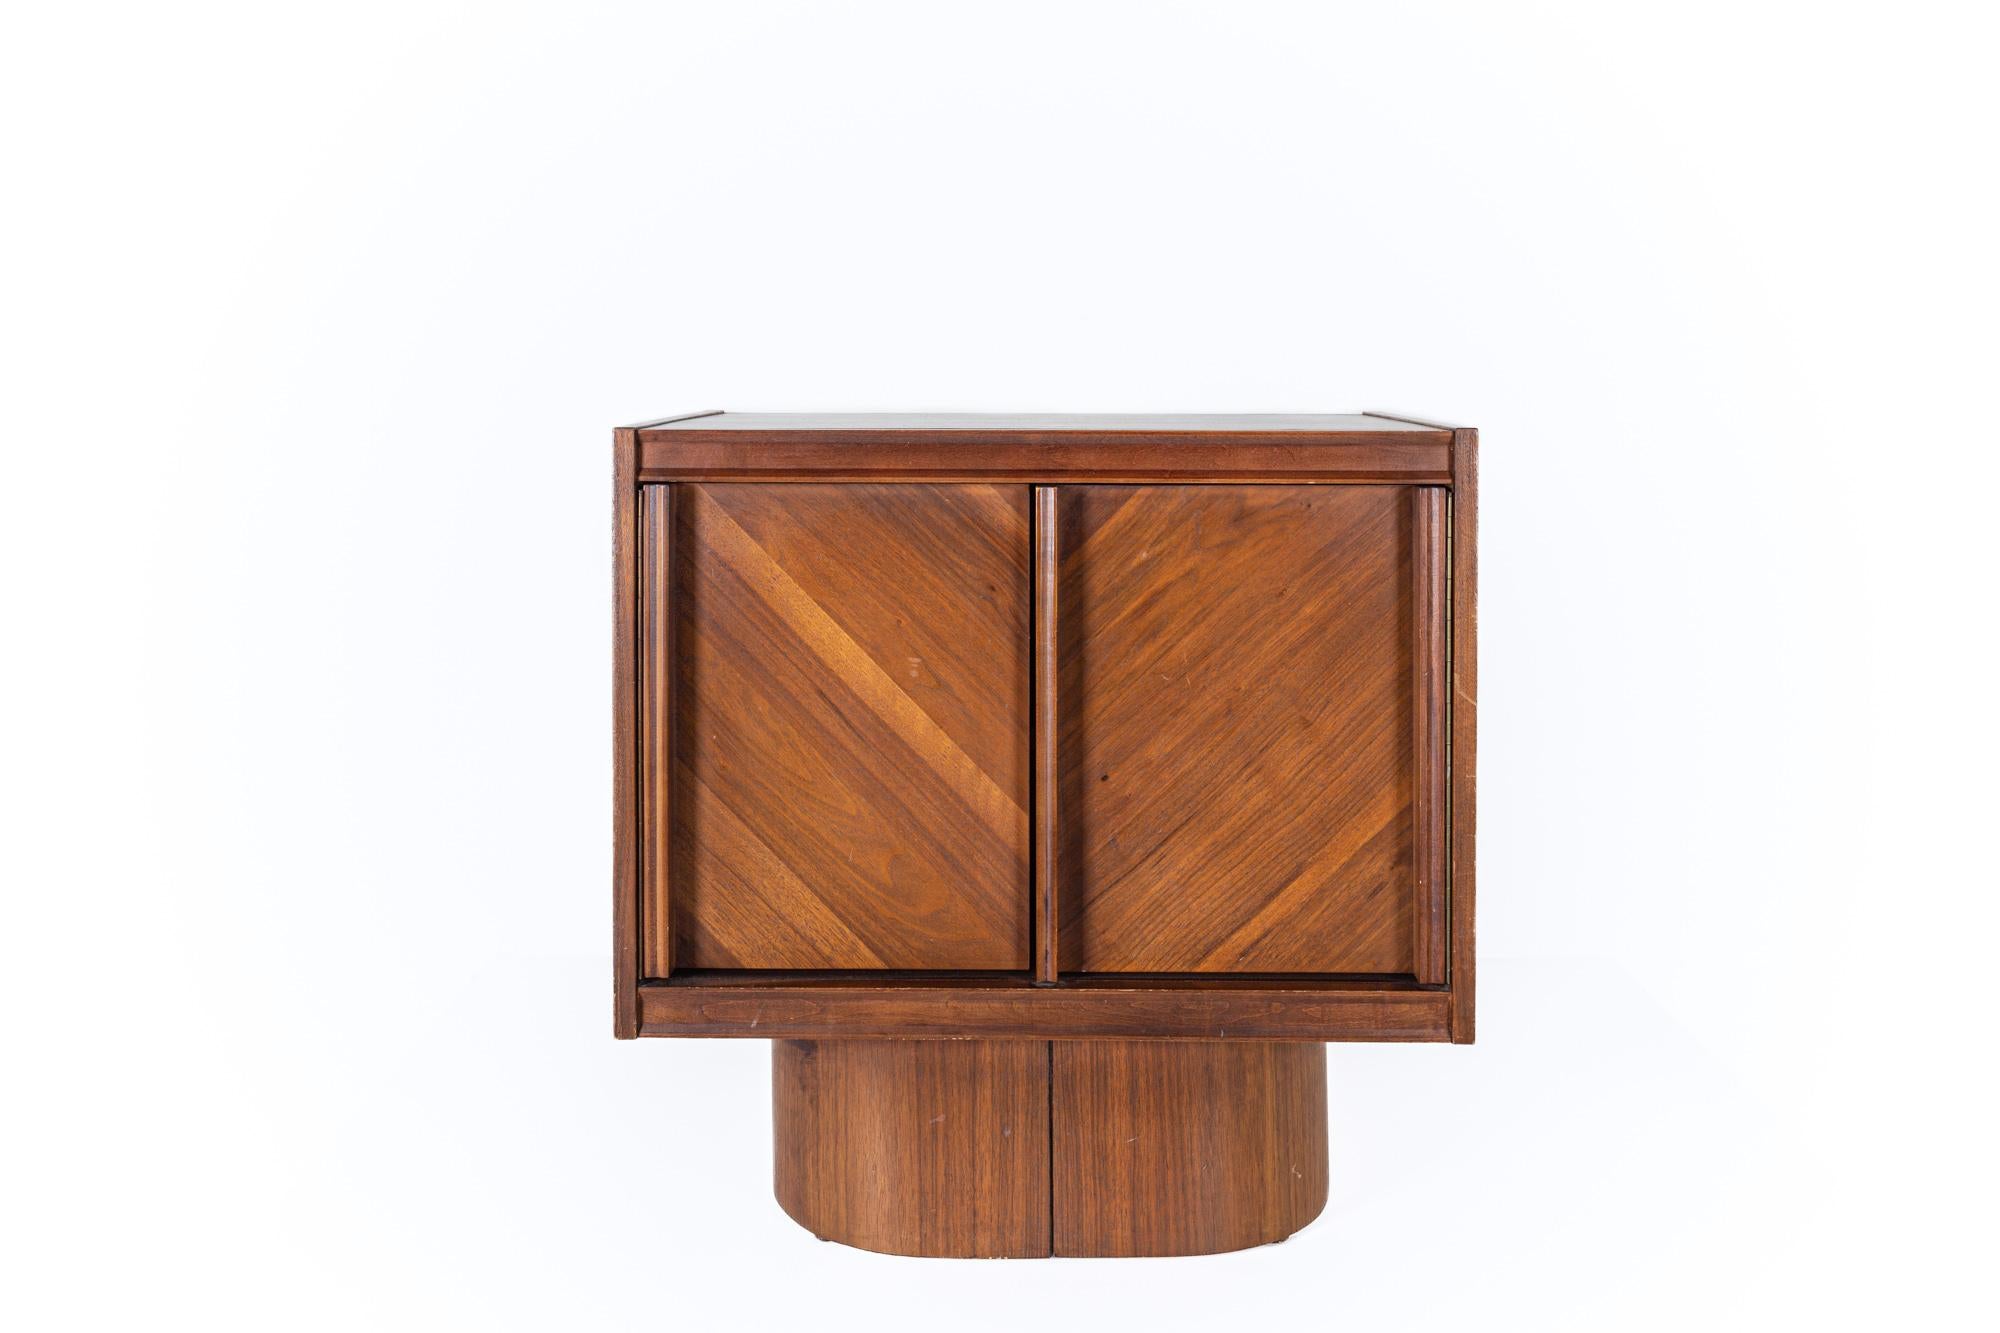 Mid century Canadian Brutalist walnut nightstand

This nightstand measures: 25 wide x 17 deep x 25 inches high

All pieces of furniture can be had in what we call restored vintage condition. That means the piece is restored upon purchase so it’s